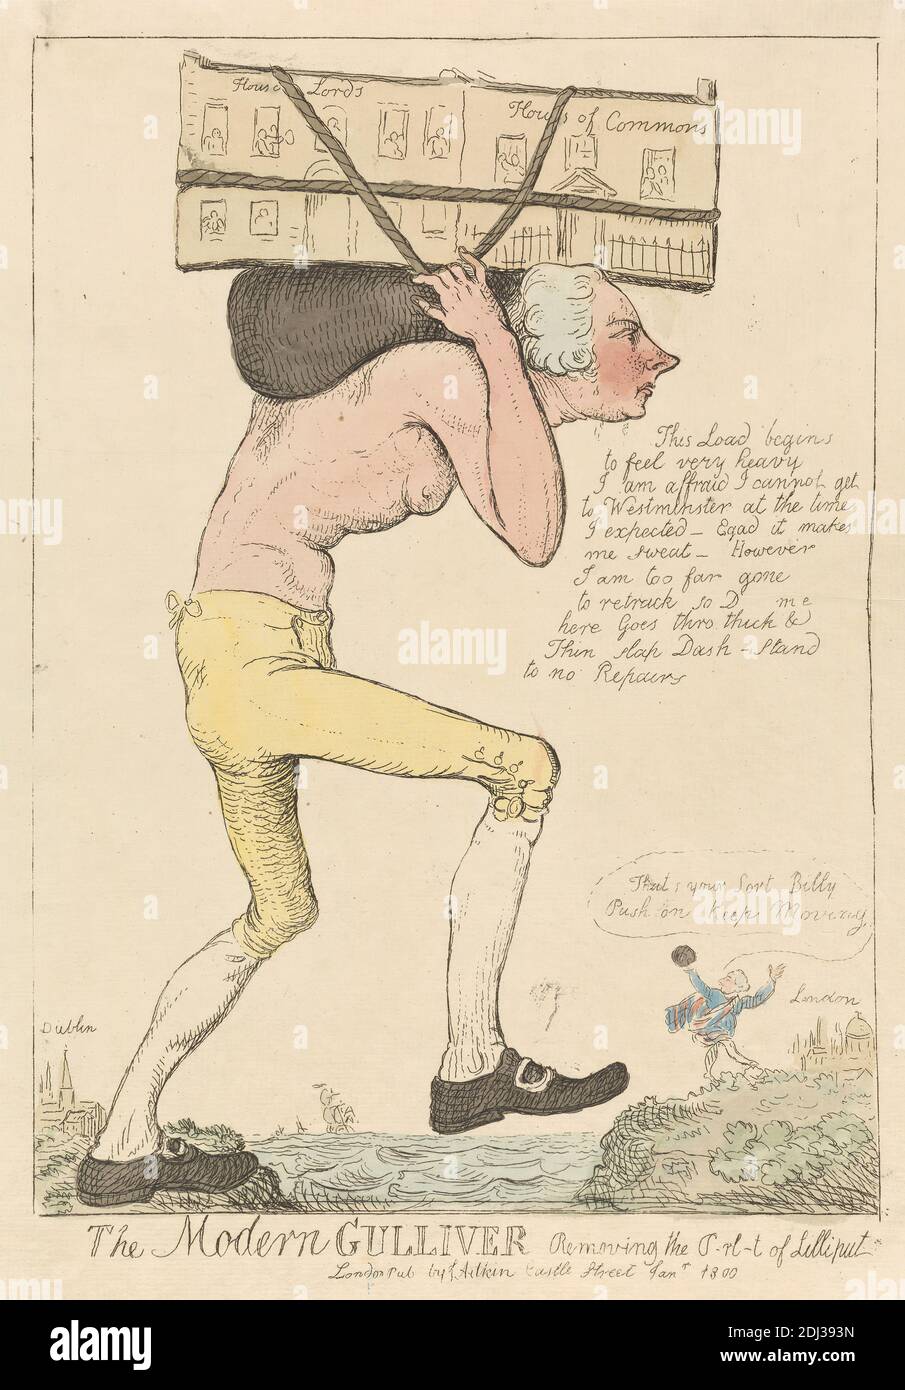 The Modern Gulliver Removing the P(a)rl(iamen)t of Lilliput, Isaac Cruikshank, 1756–1810, British, 1800, Etching, hand-colored, Sheet: 12 3/8 x 8 7/8in. (31.4 x 22.5cm Stock Photo